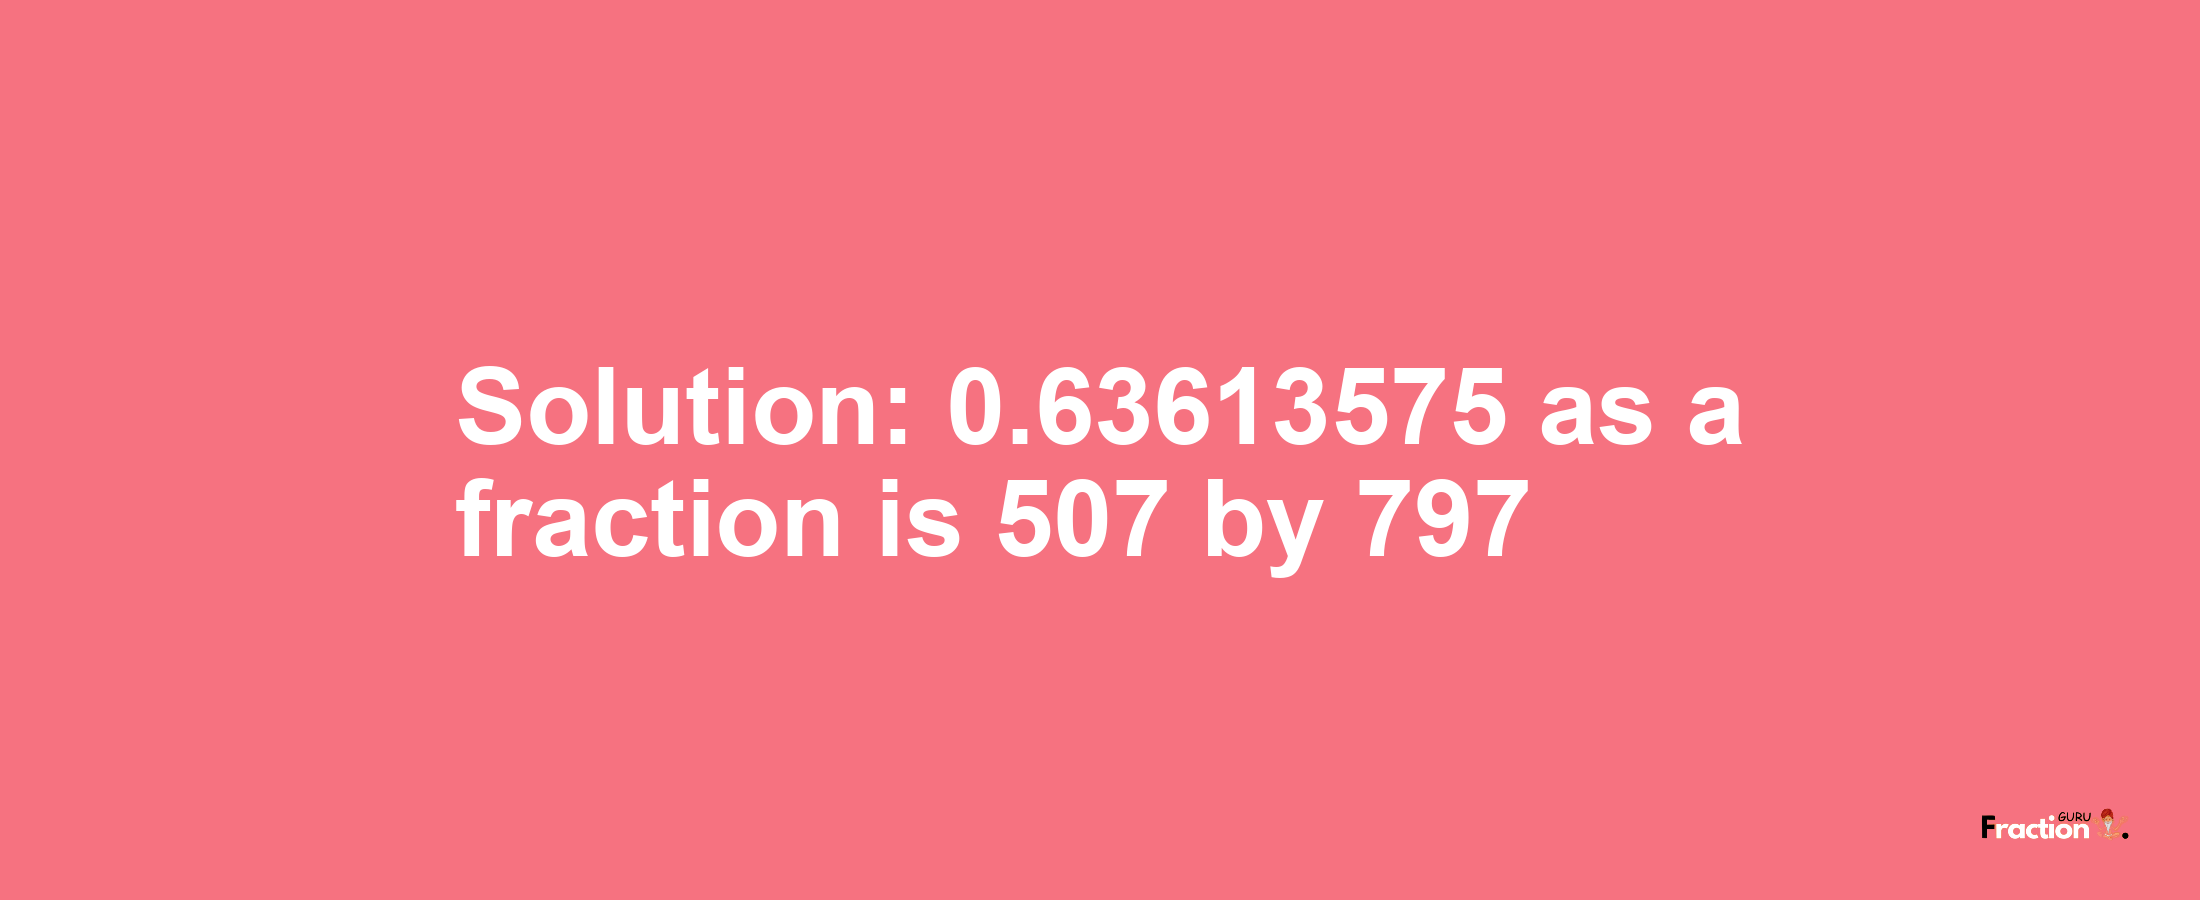 Solution:0.63613575 as a fraction is 507/797